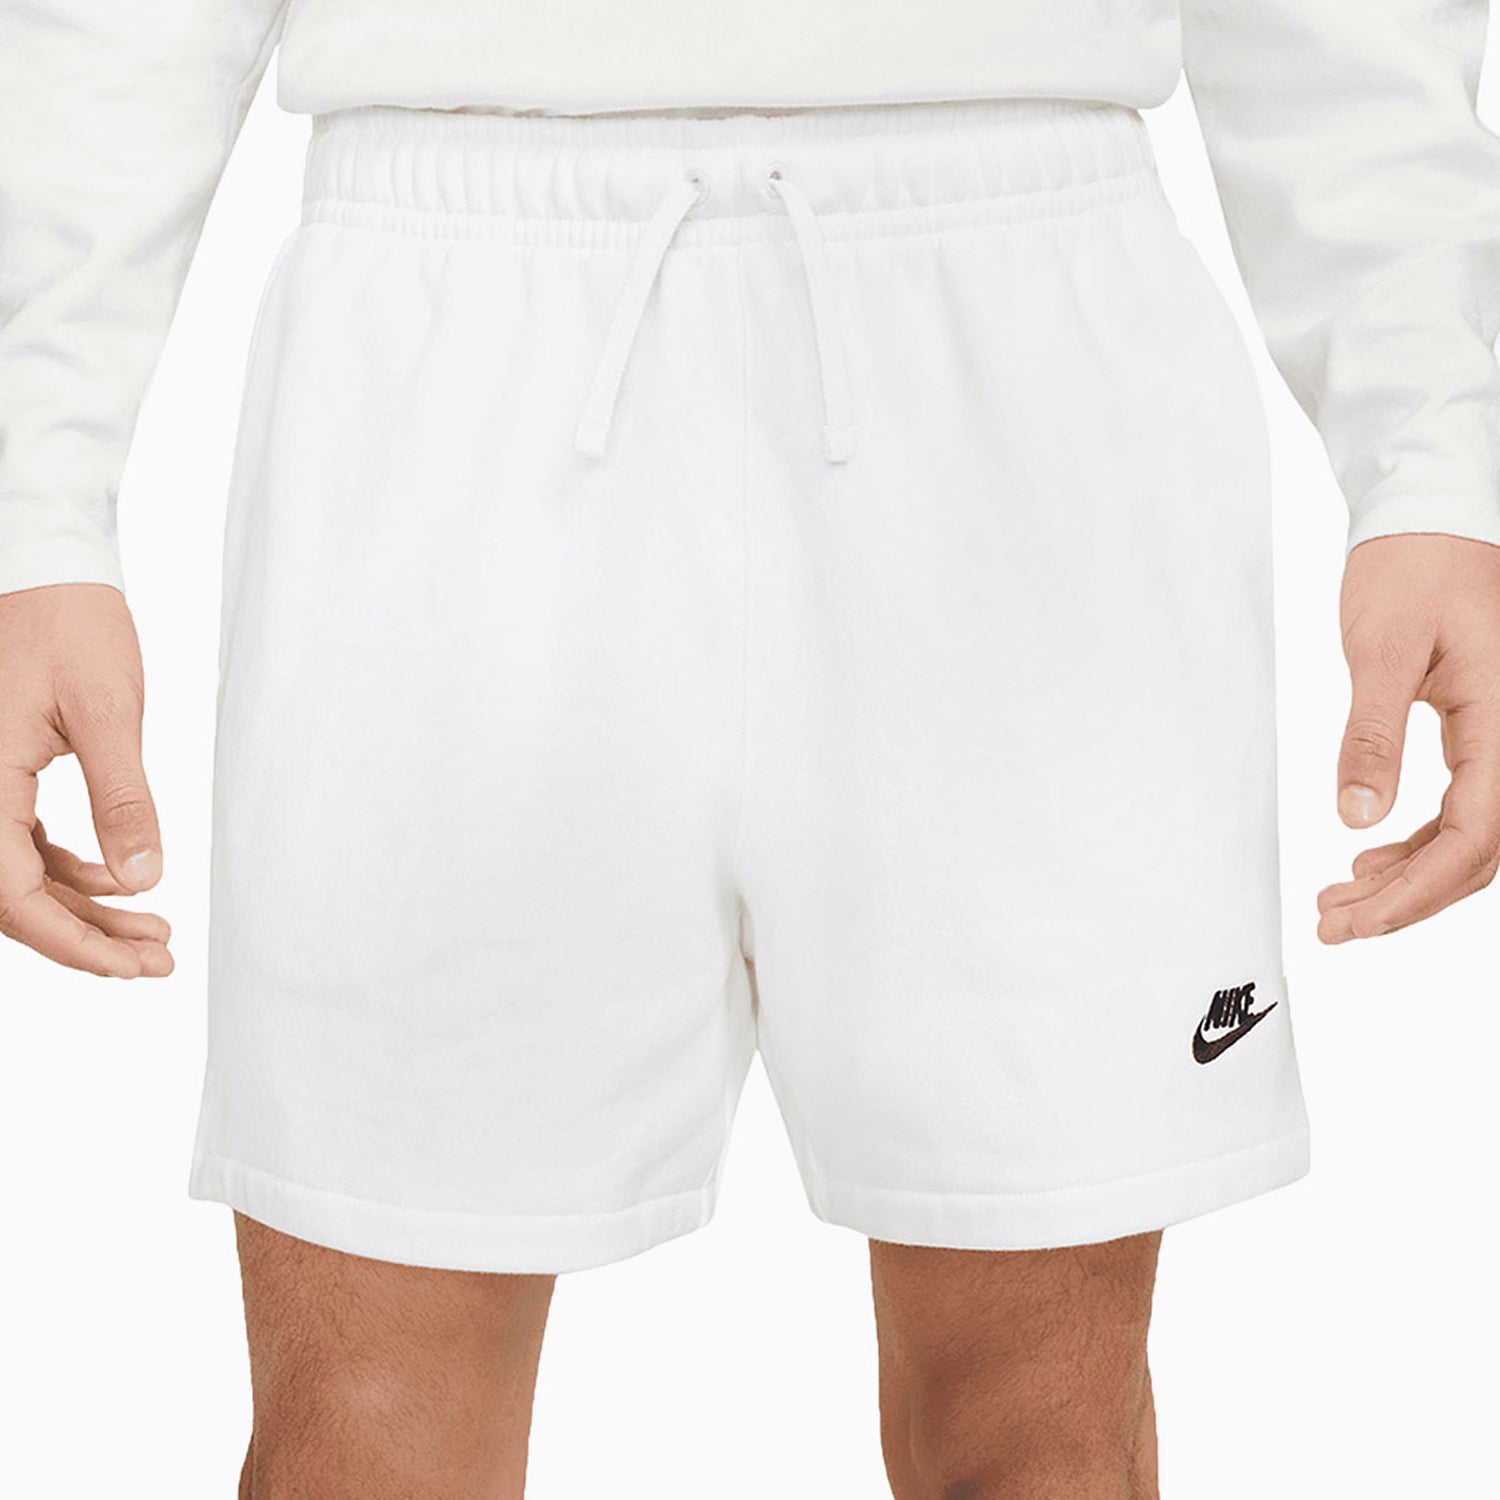 nike-mens-sportswear-t-shirt-and-shorts-outfit-ar5006-100-dx0731-100